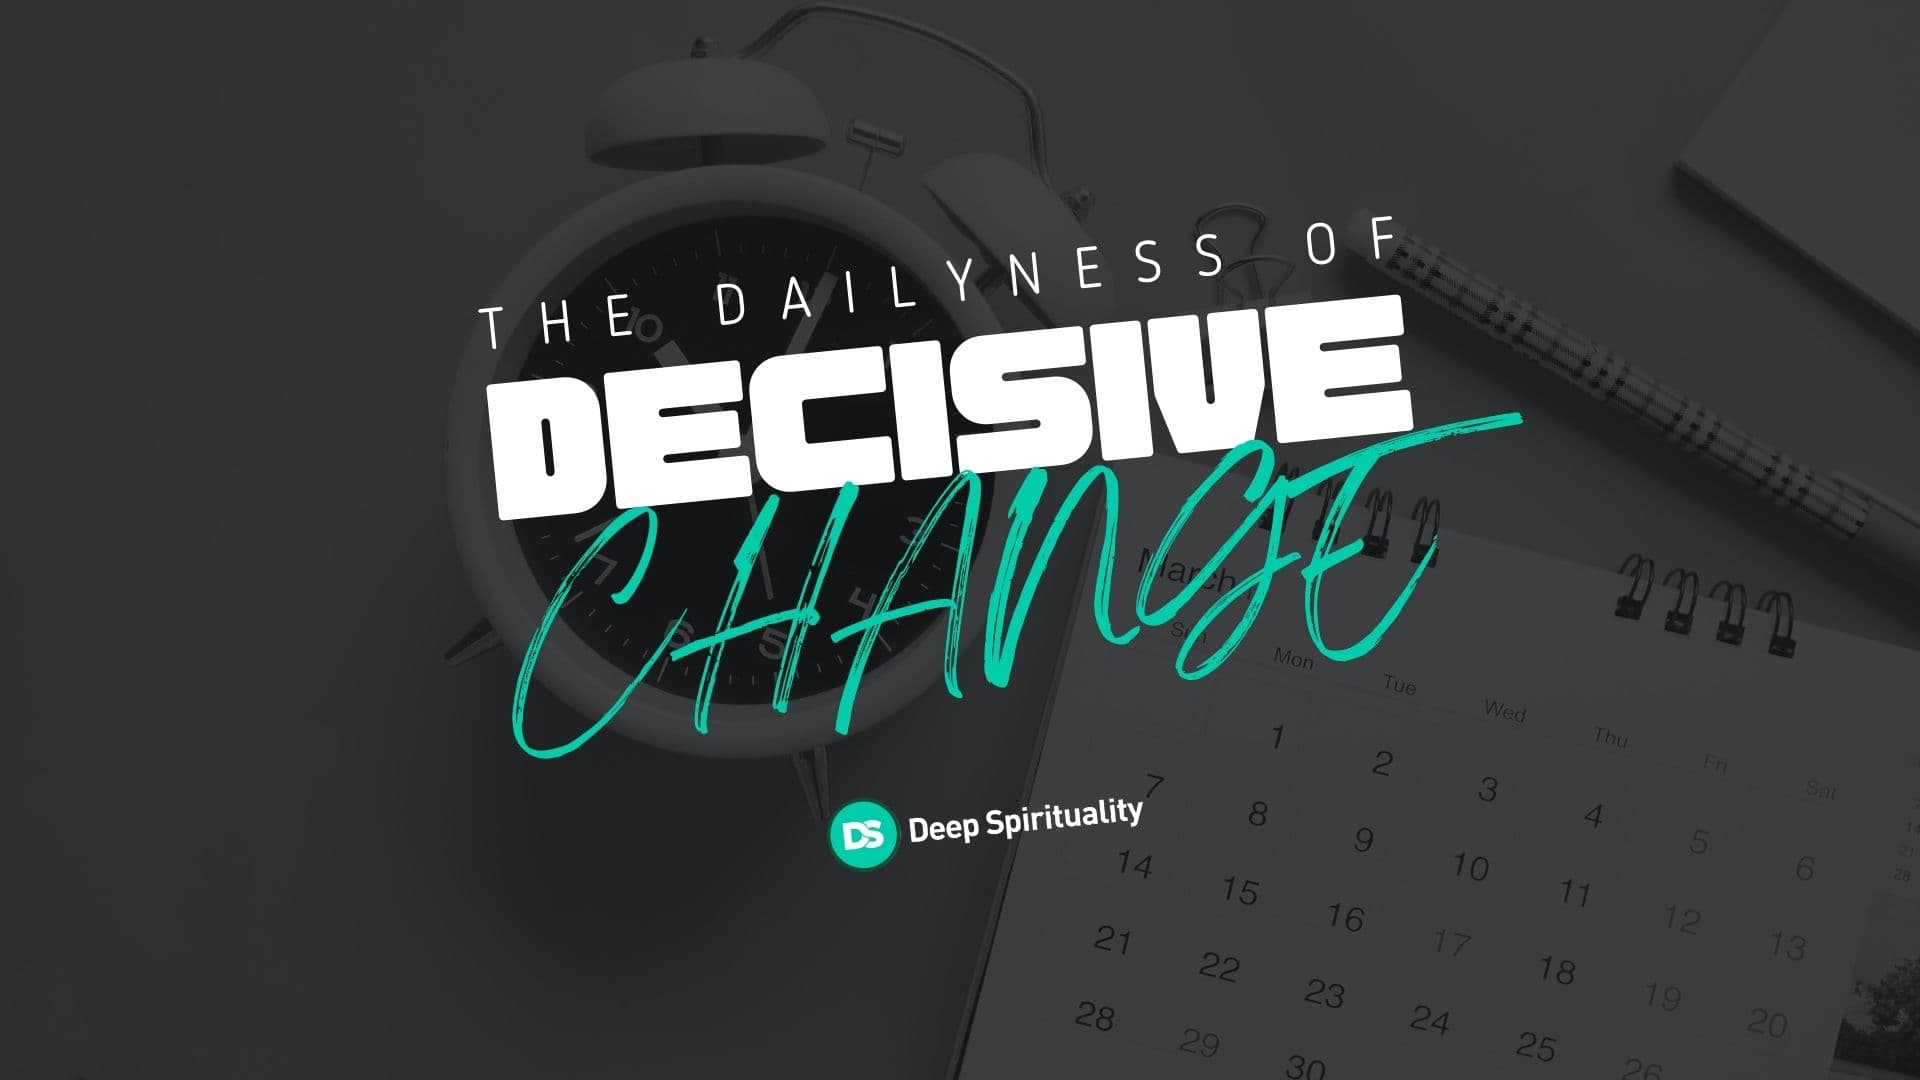 Dailyness of Decisive Change